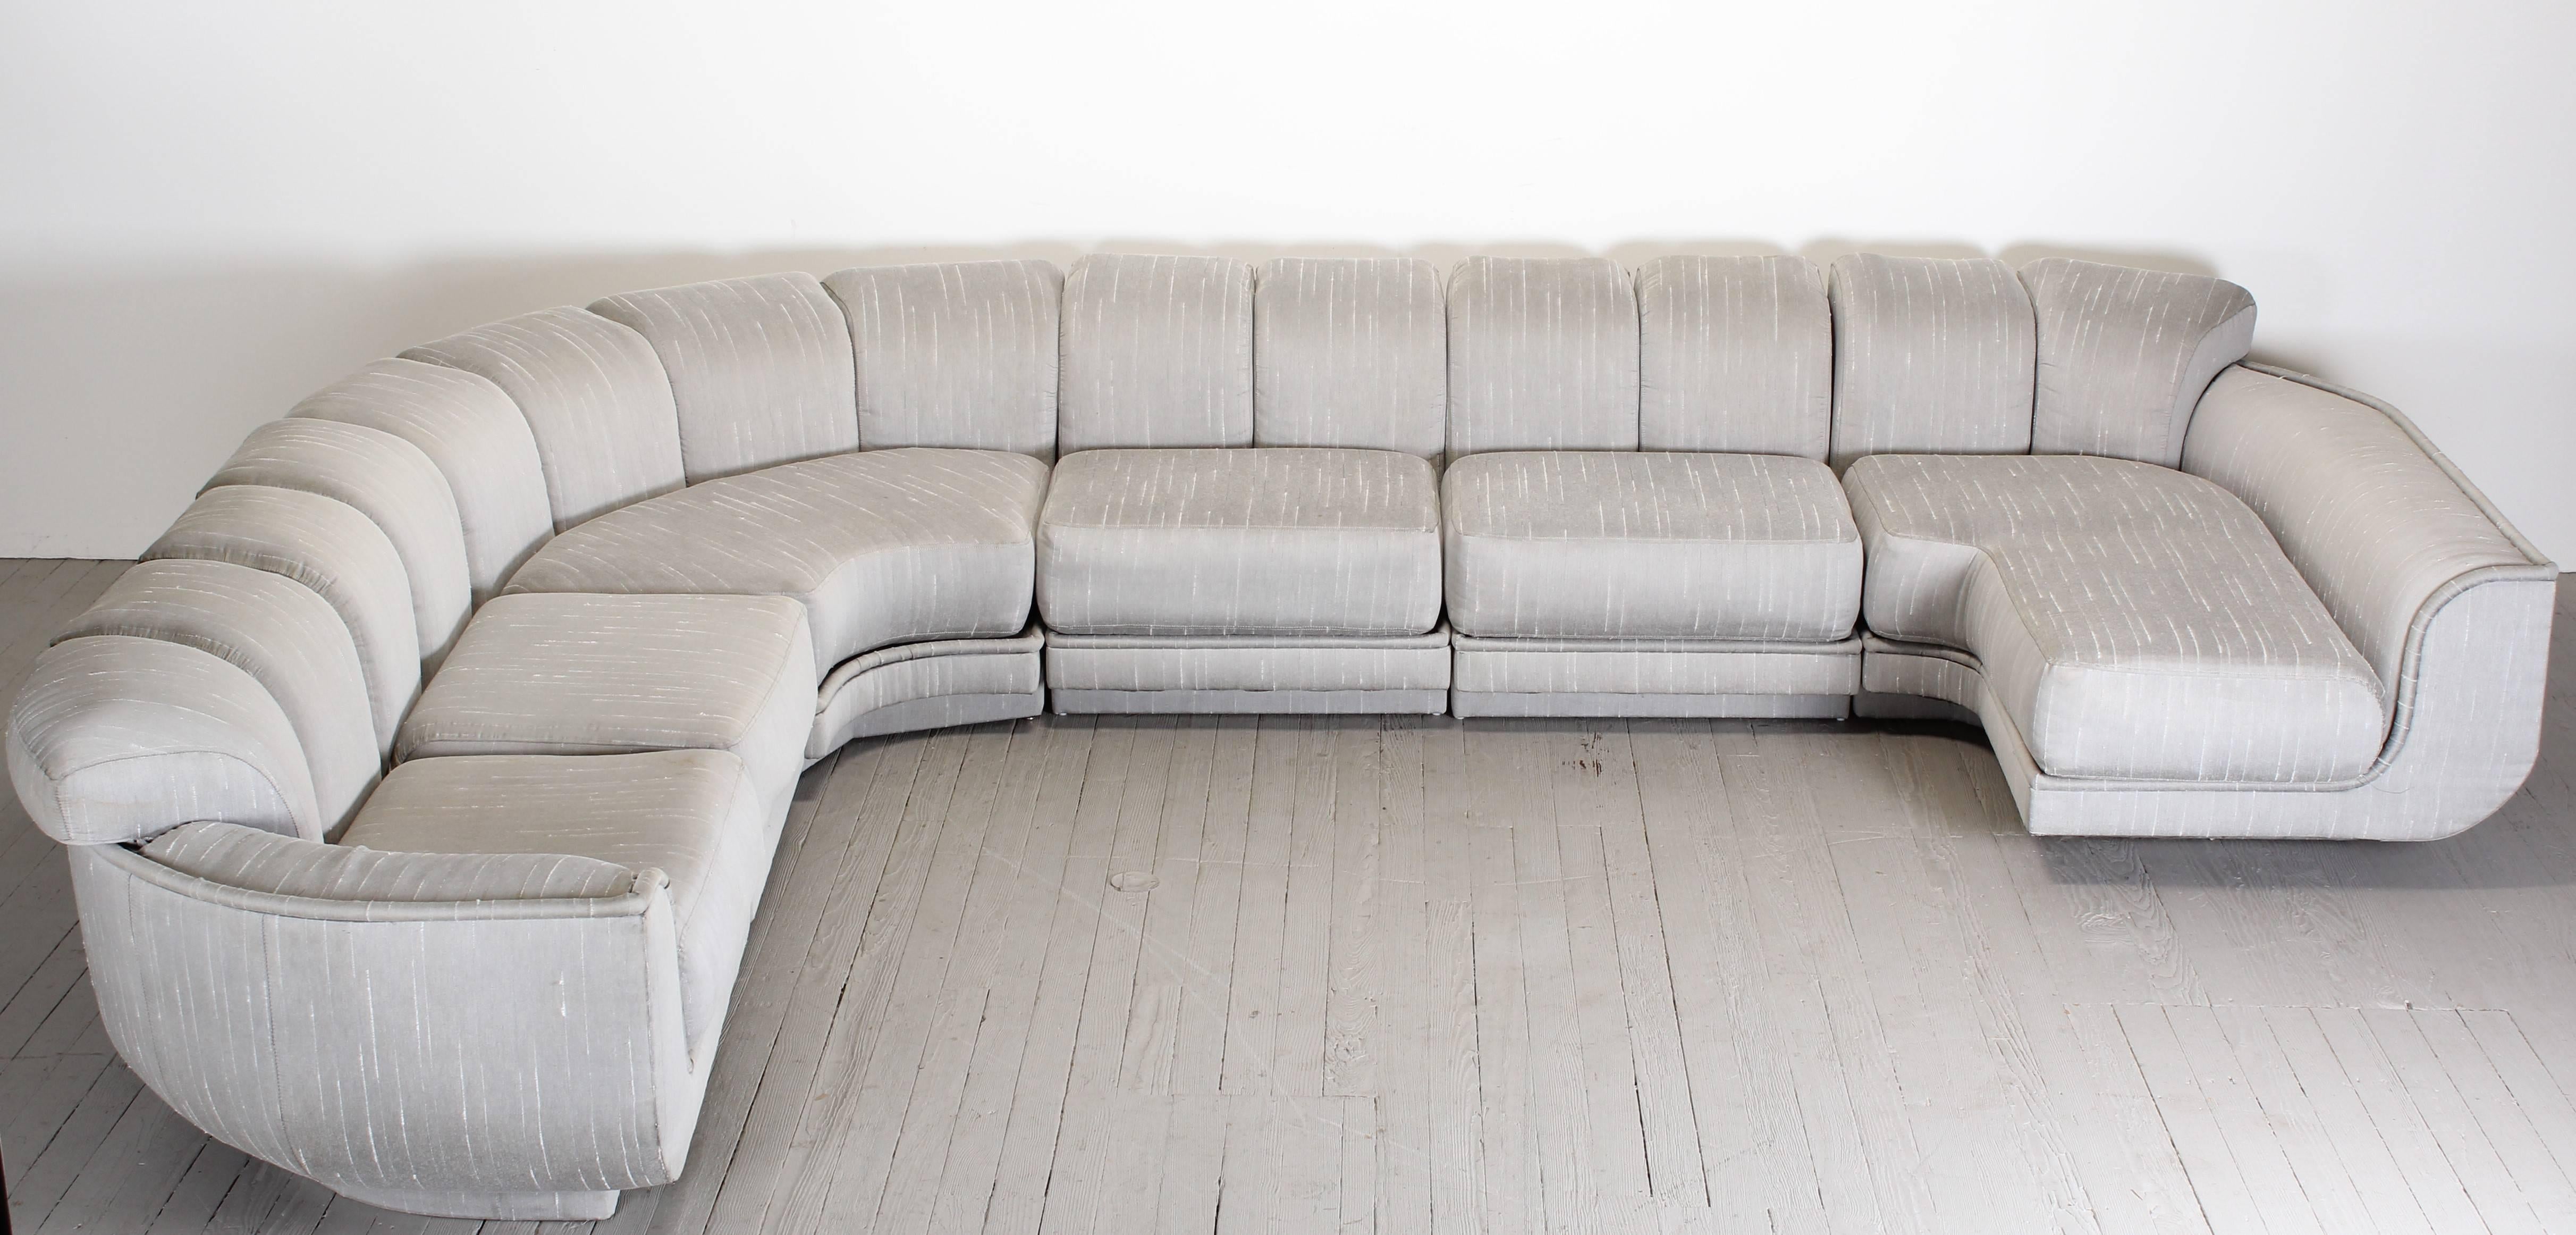 A magnificent and large-scale Milo Baughman style sectional sofa for Maurice Villency. Having wonderful exaggerated form. The sectional cushions are reminiscent of De Sede's non stop sofa. It would work well in any contemporary or traditional